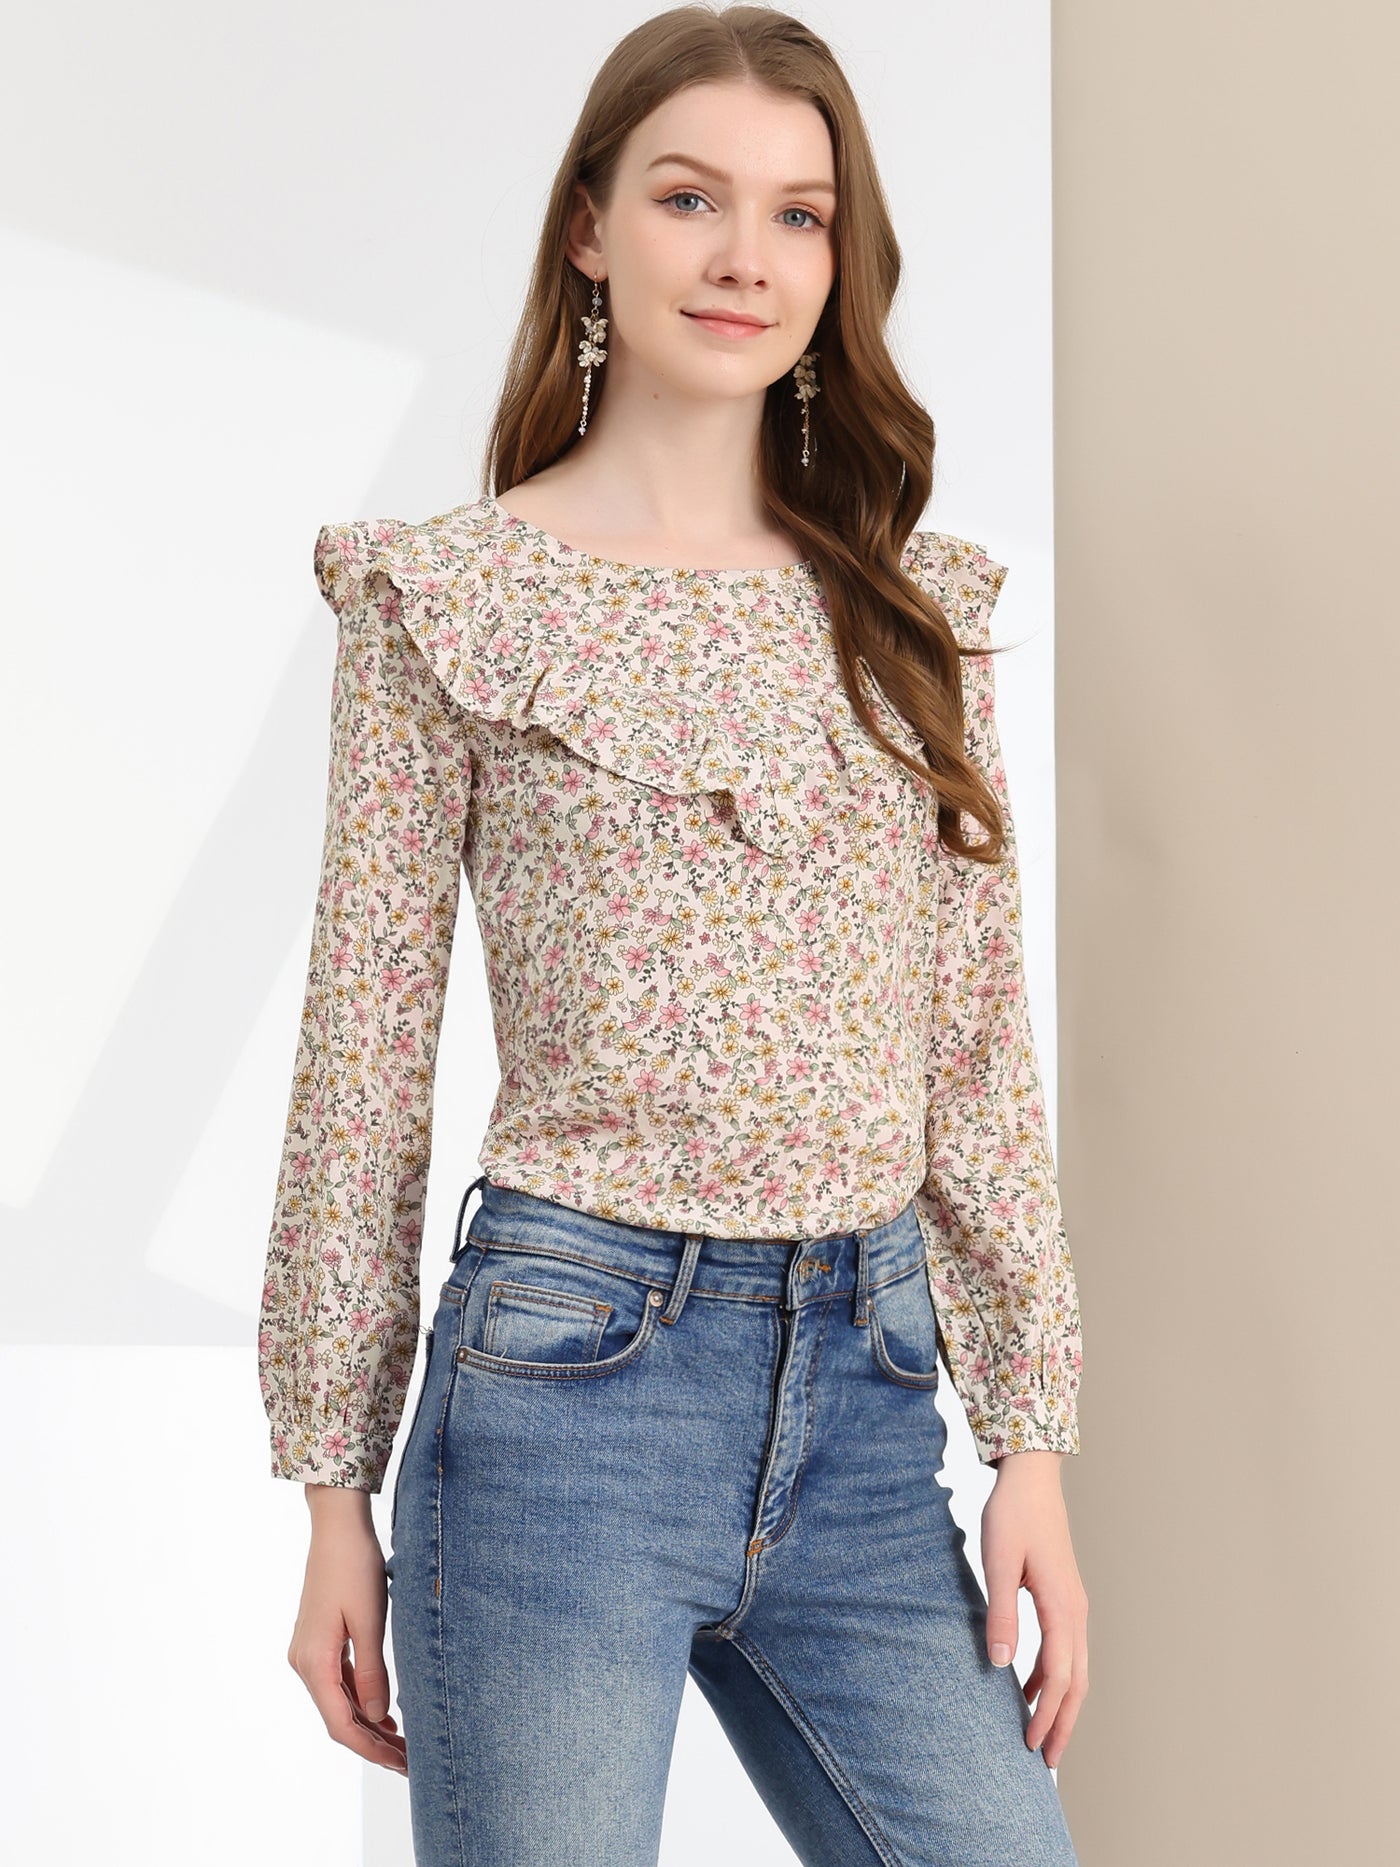 Allegra K Floral Top Long Sleeve Round Neck Vintage Ruffle Blouse